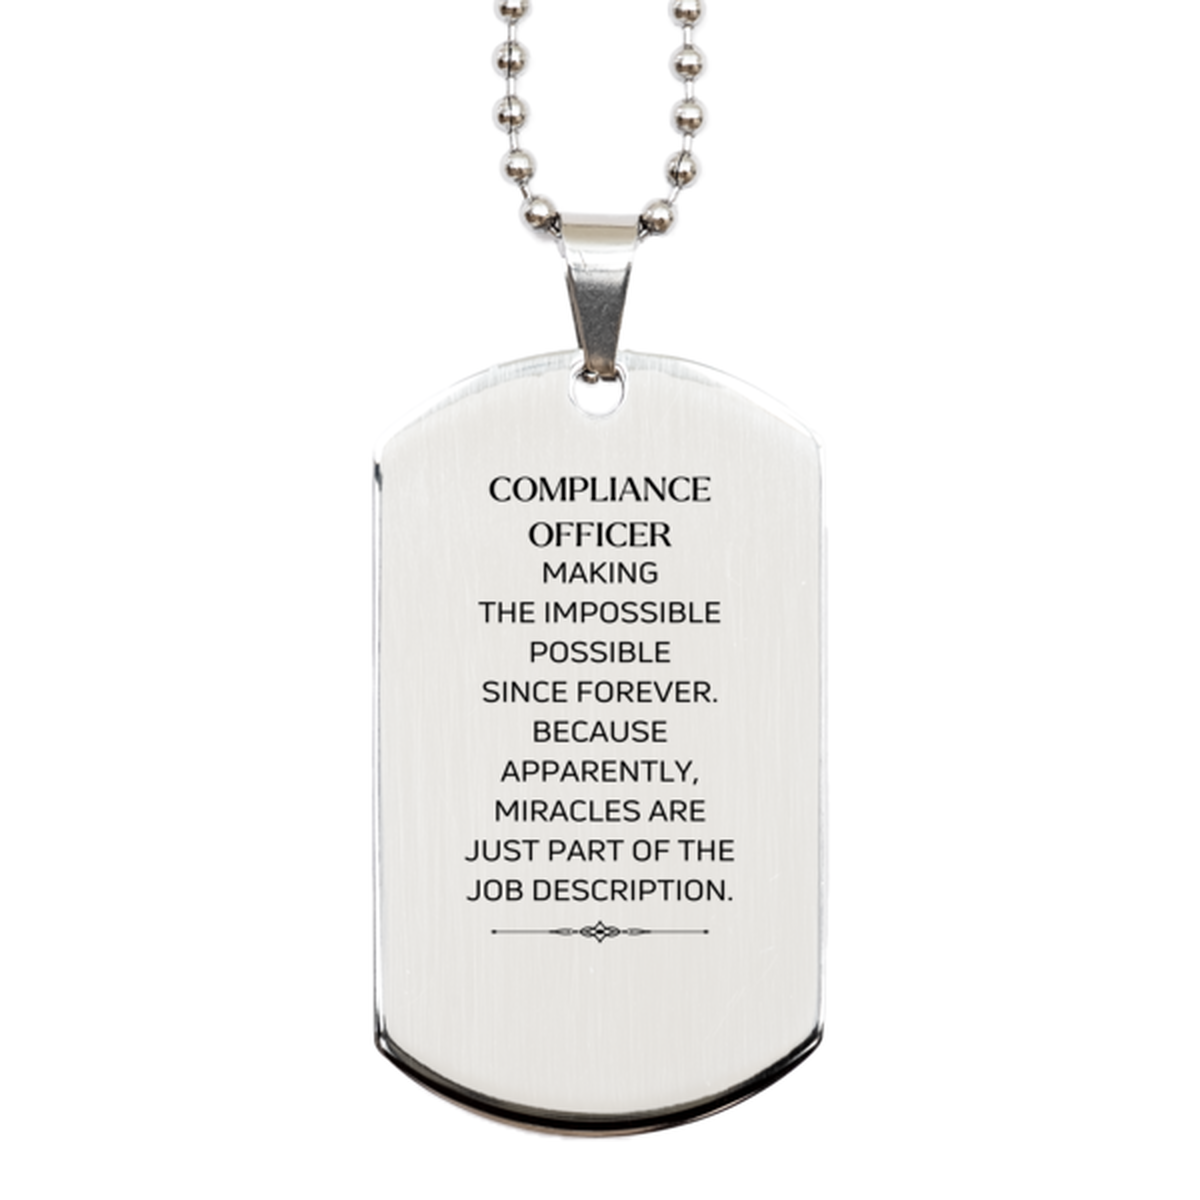 Funny Compliance Officer Gifts, Miracles are just part of the job description, Inspirational Birthday Silver Dog Tag For Compliance Officer, Men, Women, Coworkers, Friends, Boss